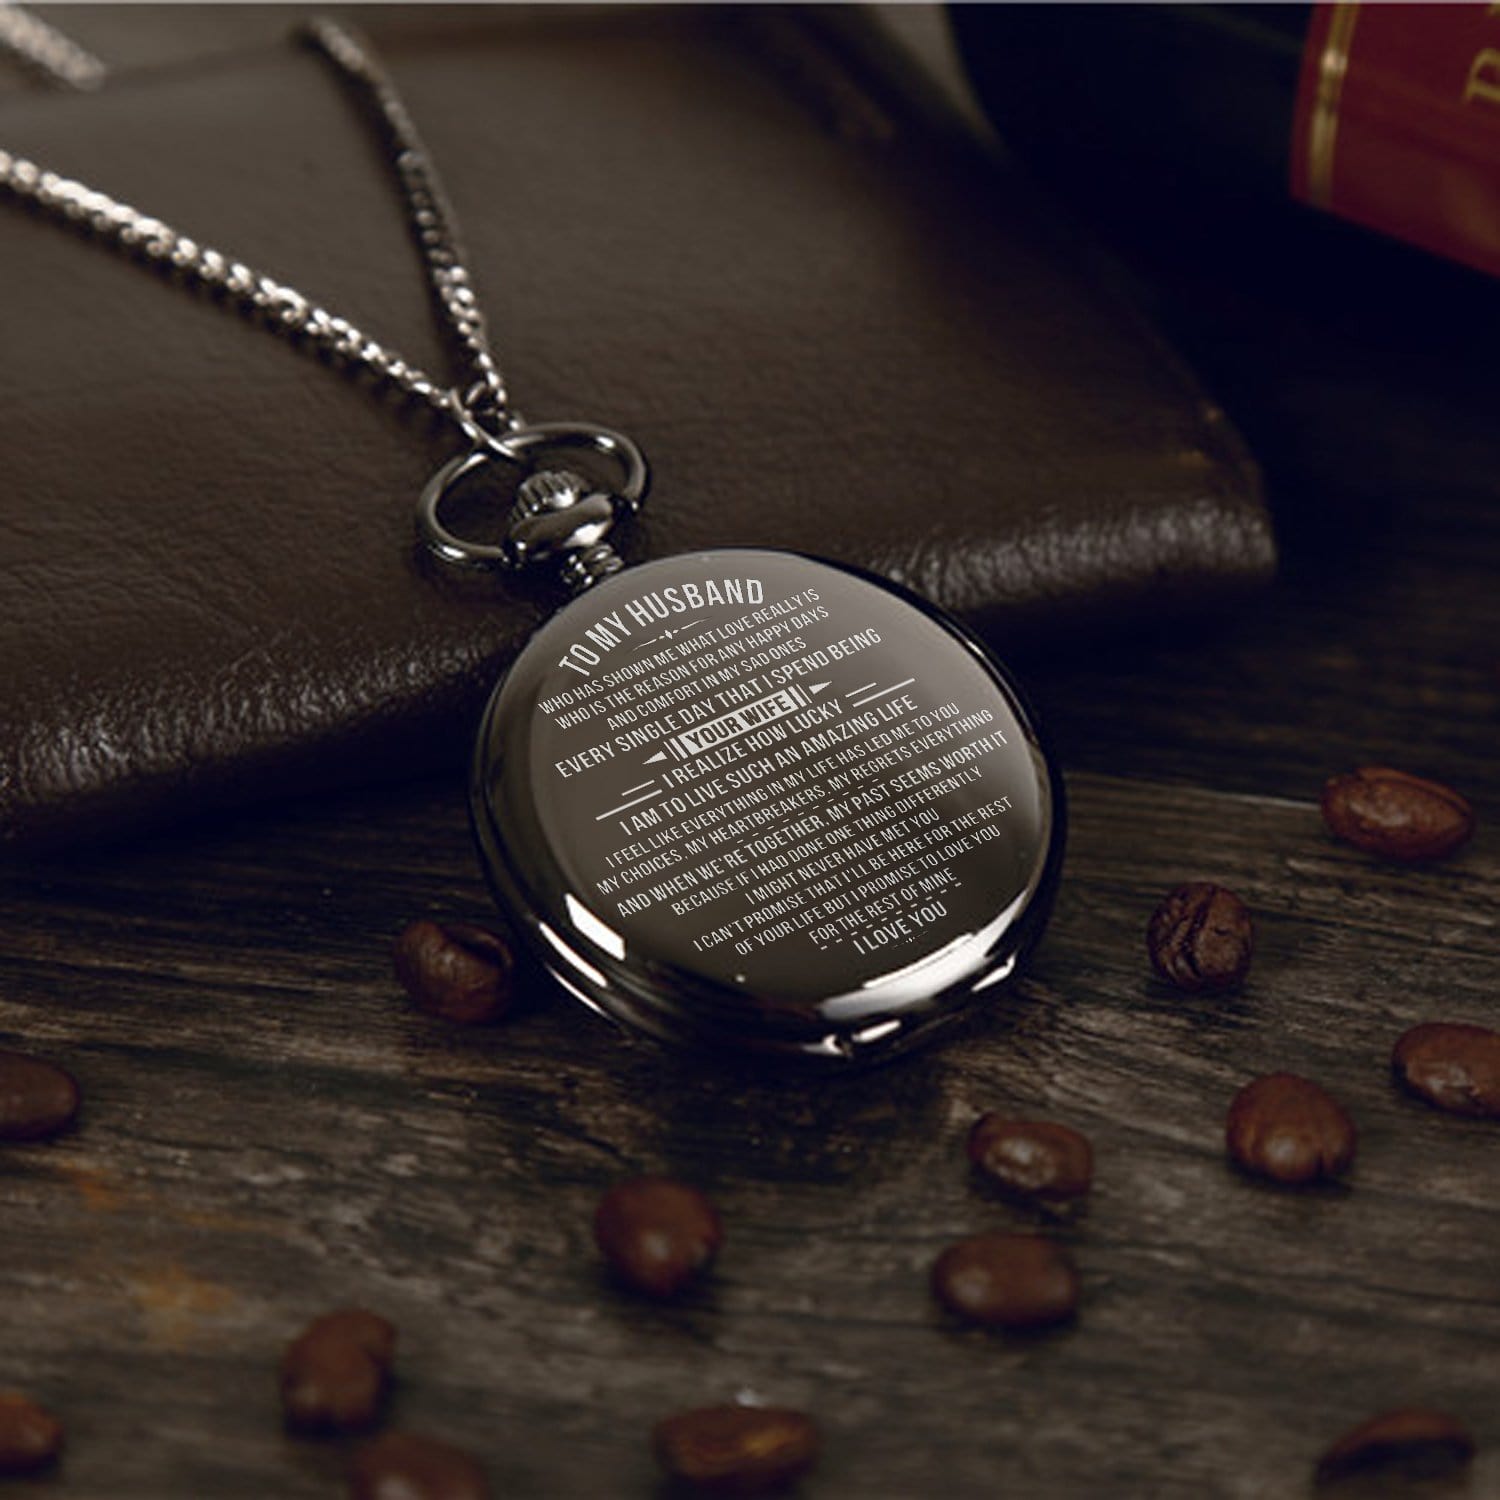 Pocket Watches To My Husband - I Love You Every Single Day Pocket Watch GiveMe-Gifts